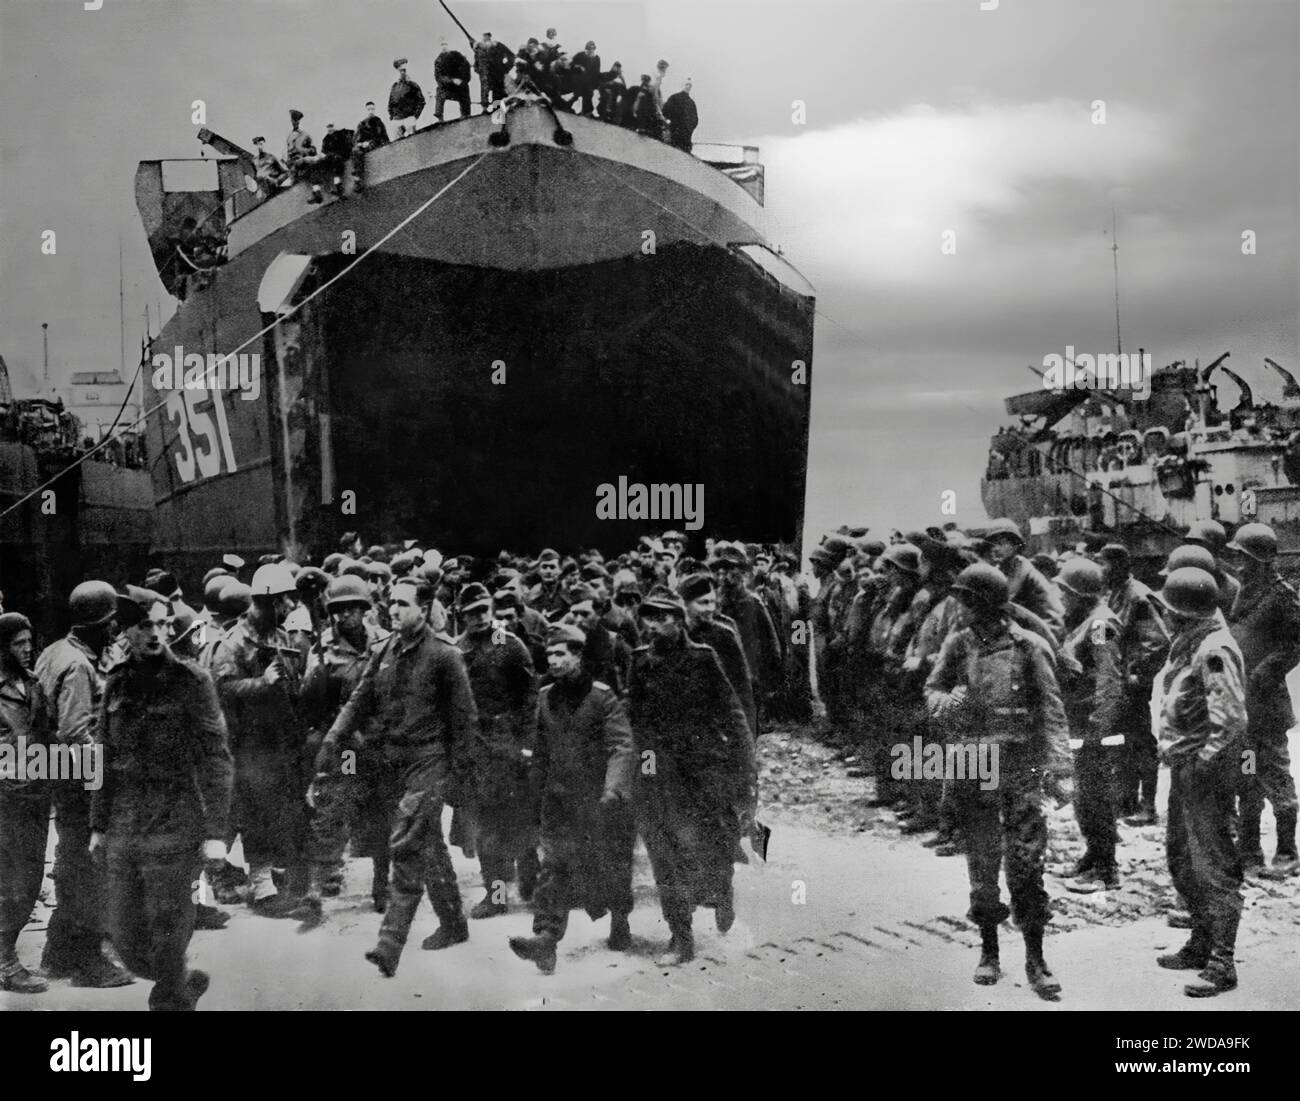 German prisoners disembarking from a landing craft at the beginning of February 1944 en route to a prison camp. It followed the Second World War break through of the Gustav Line, built to defend western Italy, stretching from north of the Garigliano River in the west, through the Apennine Mountains to the mouth of the Sangro River on the Adriatic coast in the east. Stock Photo